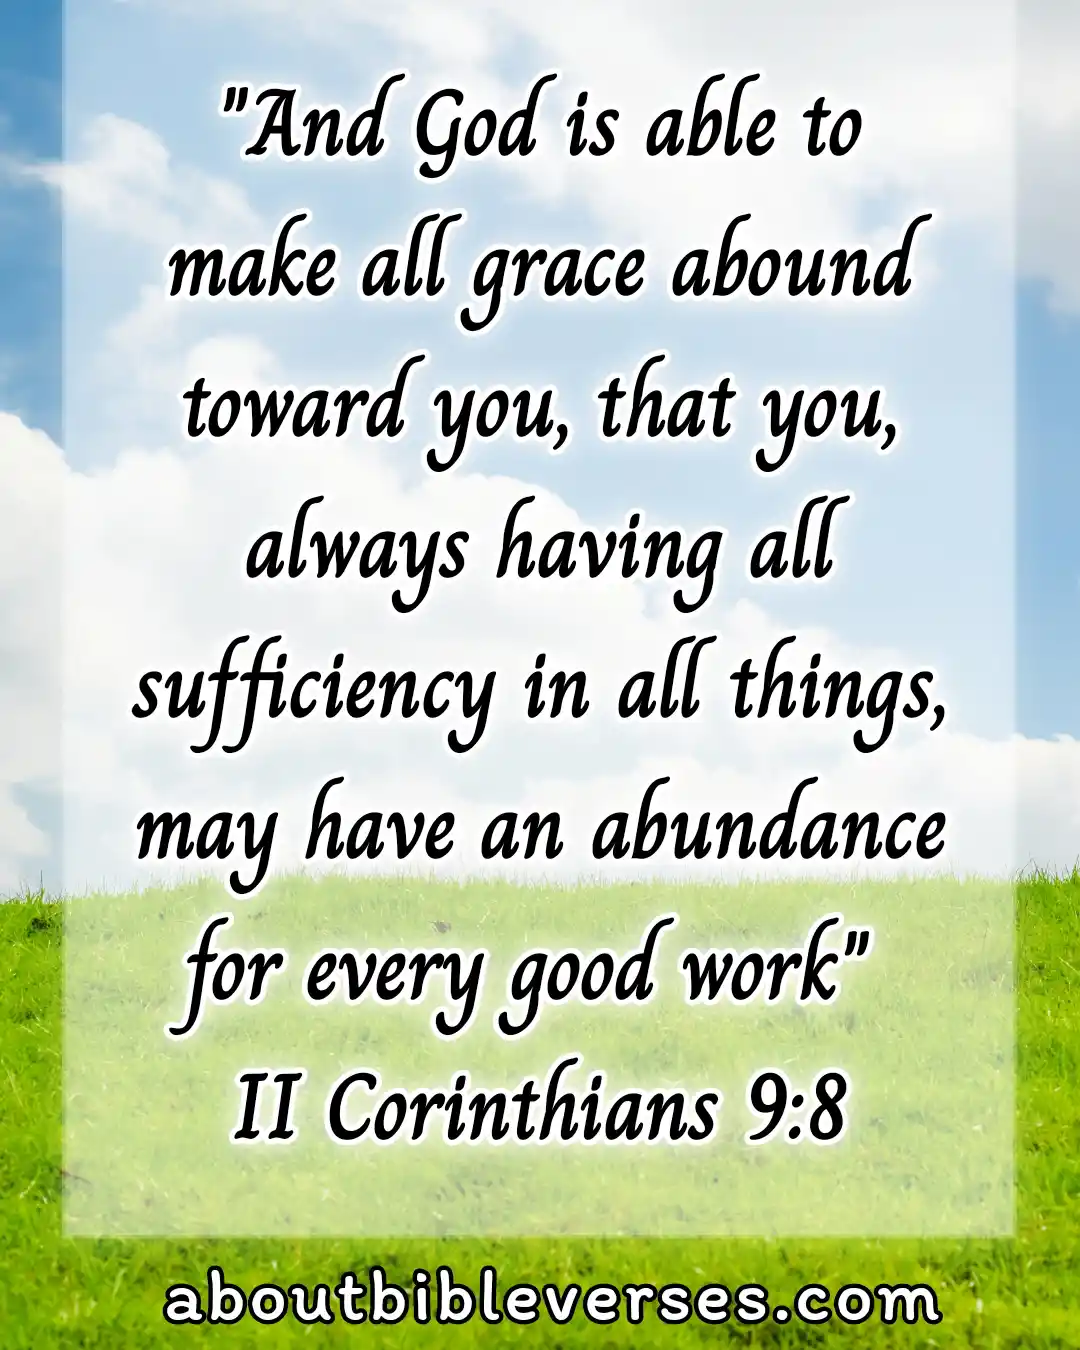 Happy Friday Blessings With Bible Verses (2 Corinthians 9:8)